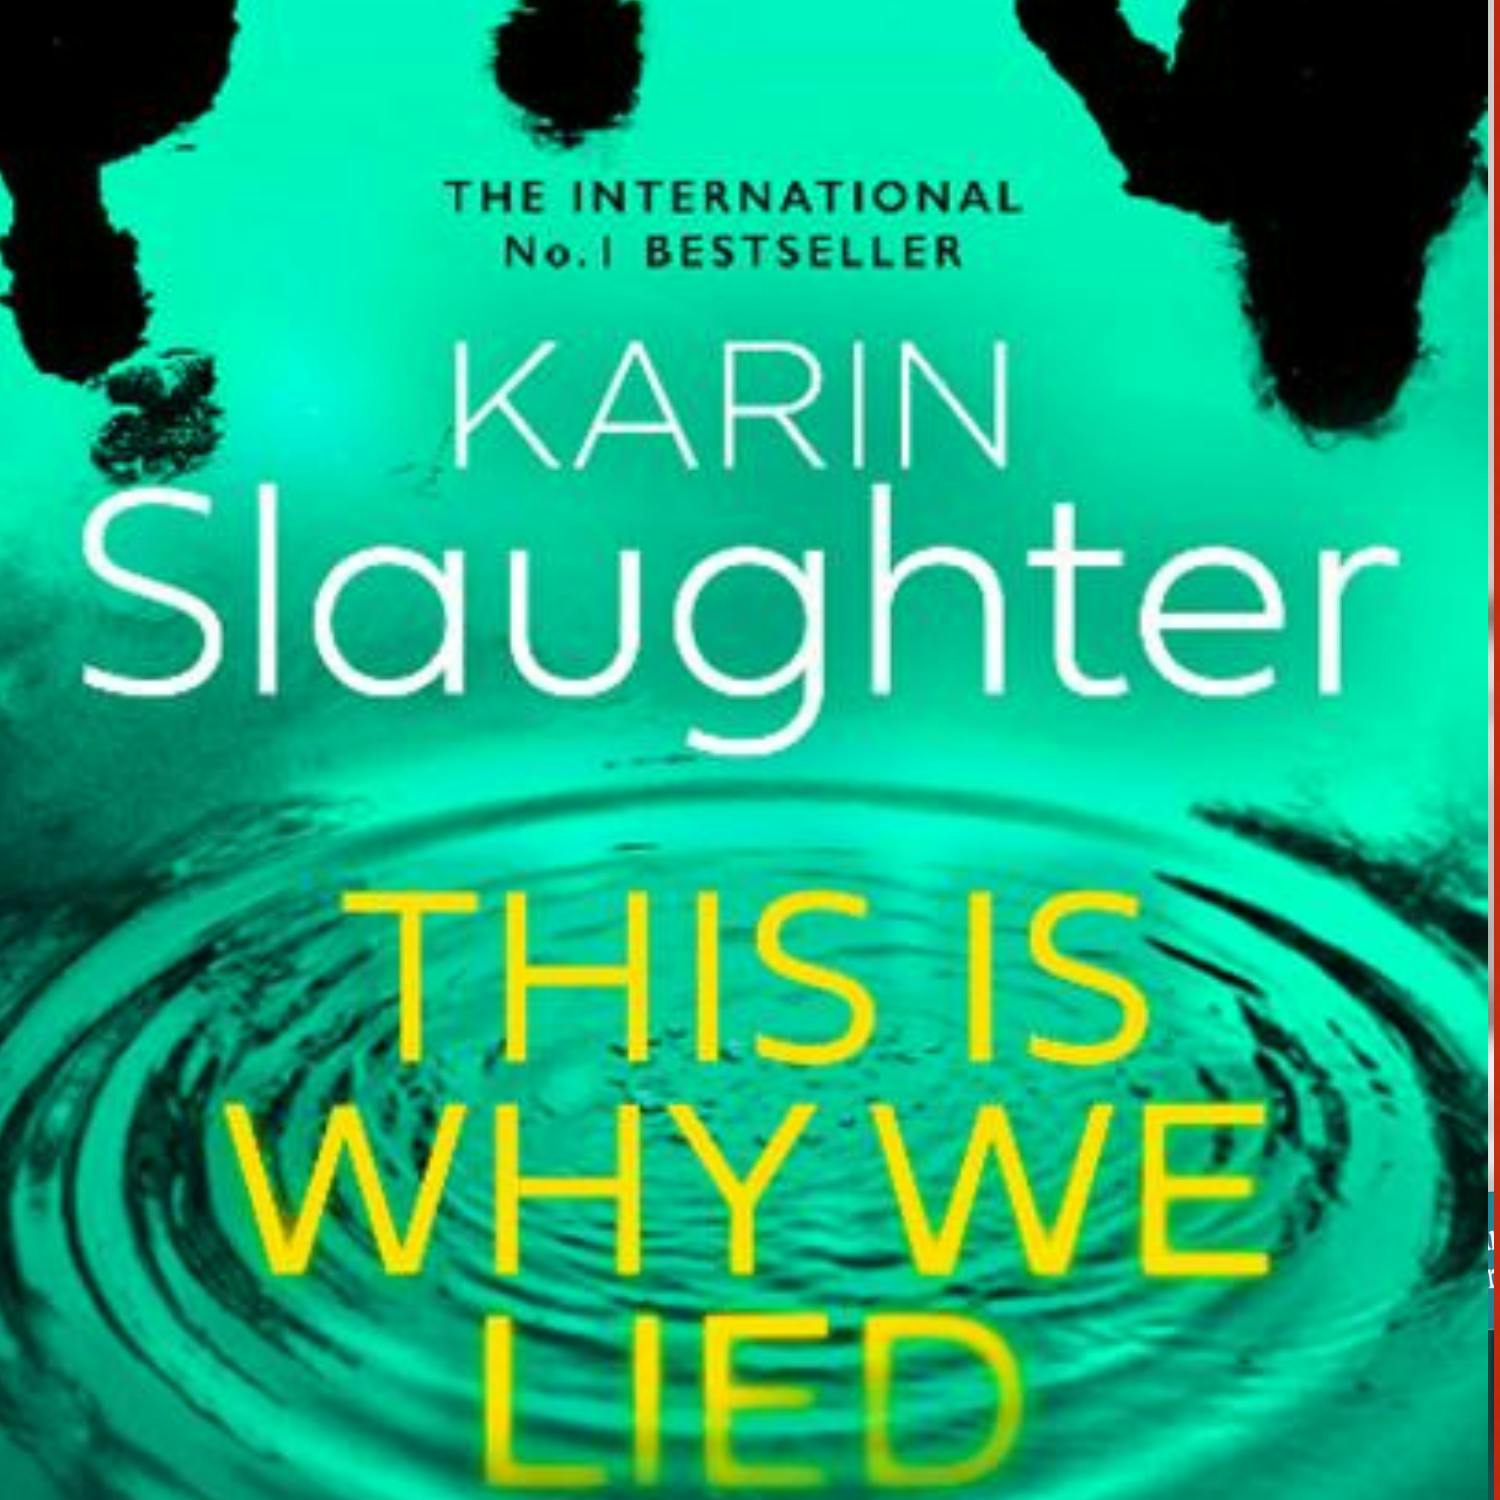 Author Karin Slaughter on her new book ‘This Is Why We Lied’